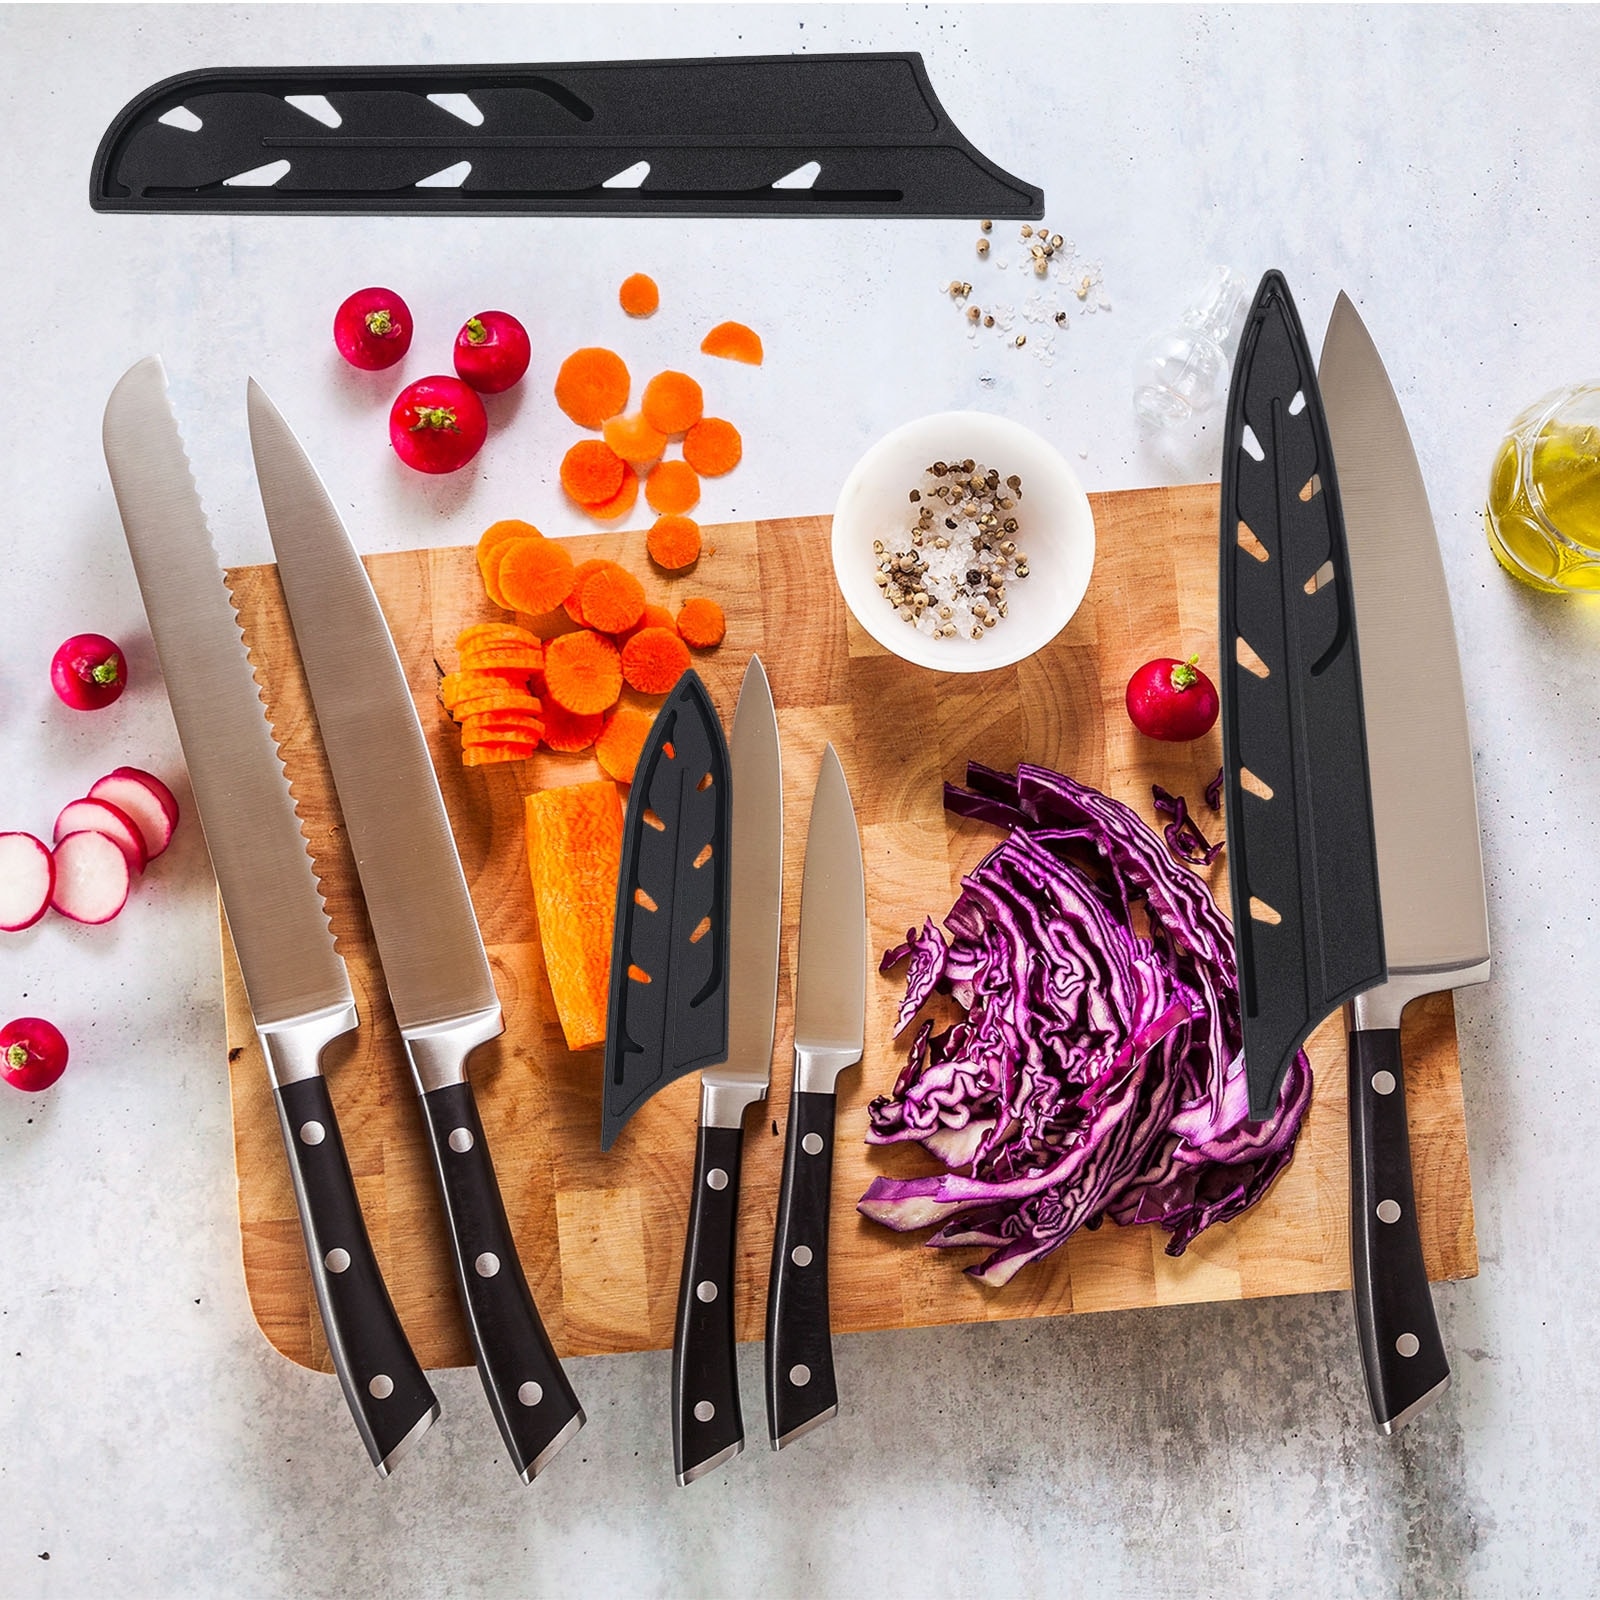 https://ak1.ostkcdn.com/images/products/is/images/direct/62bd42dfaeccf7574e3914c96c05c09b78793ef8/2Pcs-Plastic-Kitchen-Knife-Sheath-Cover-Sleeves-for-6%22-Ceramic-Knife.jpg